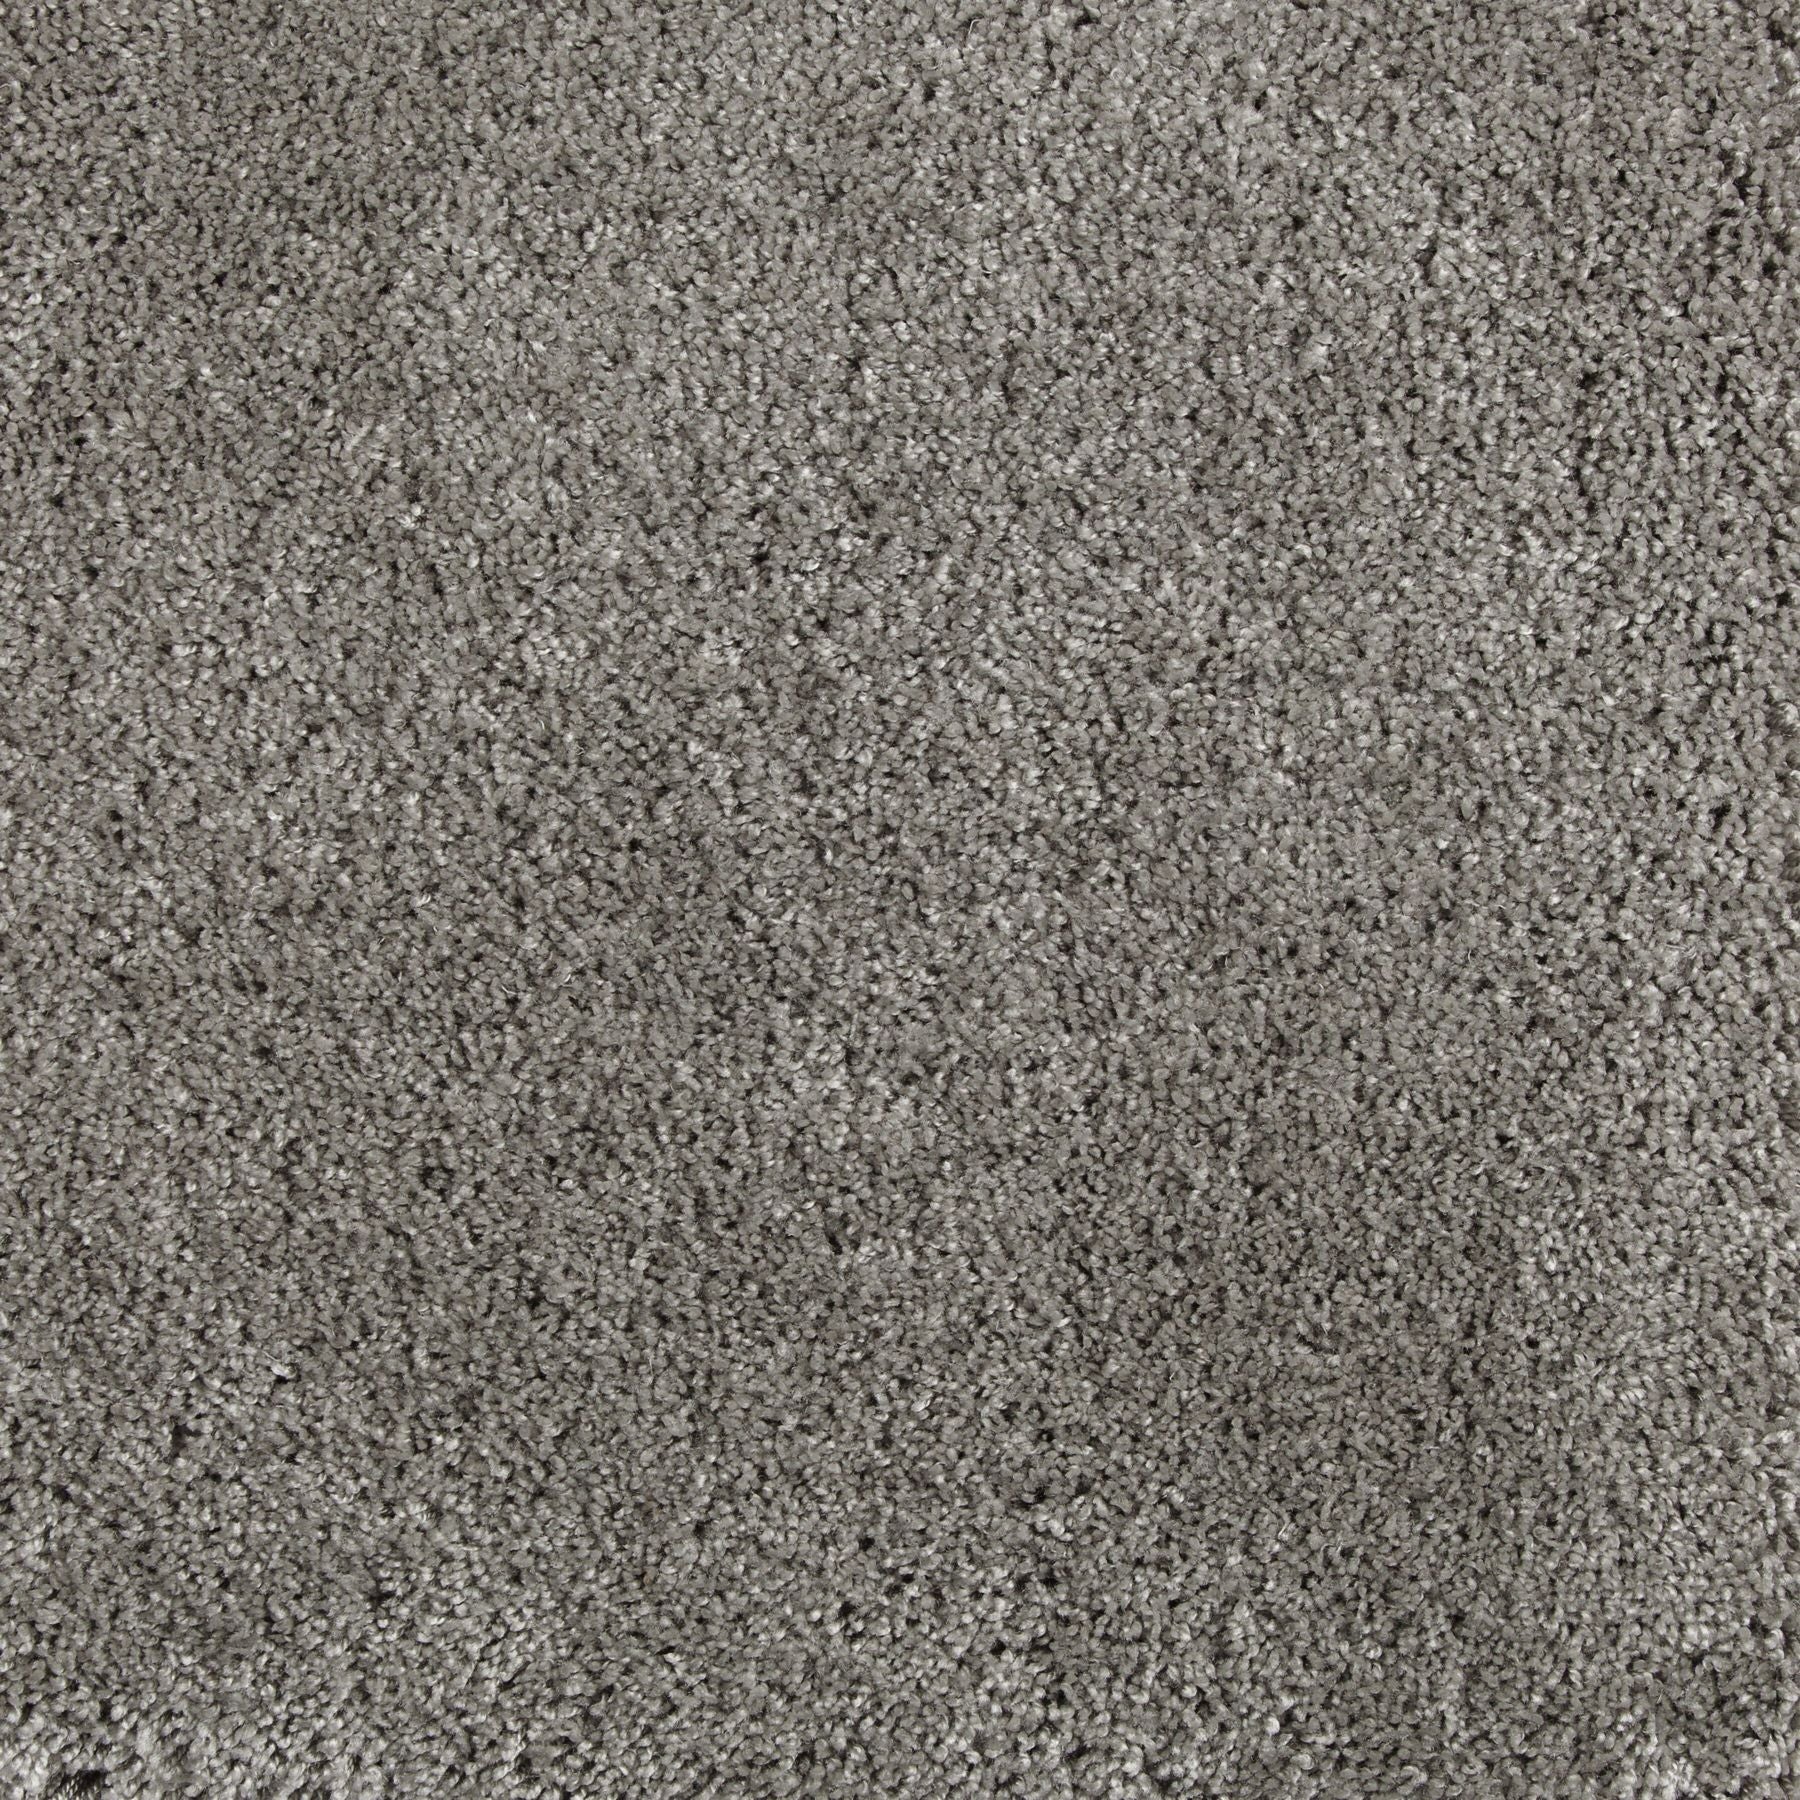 Synthetic broadloom carpet swatch in a cut pile texture in gray.